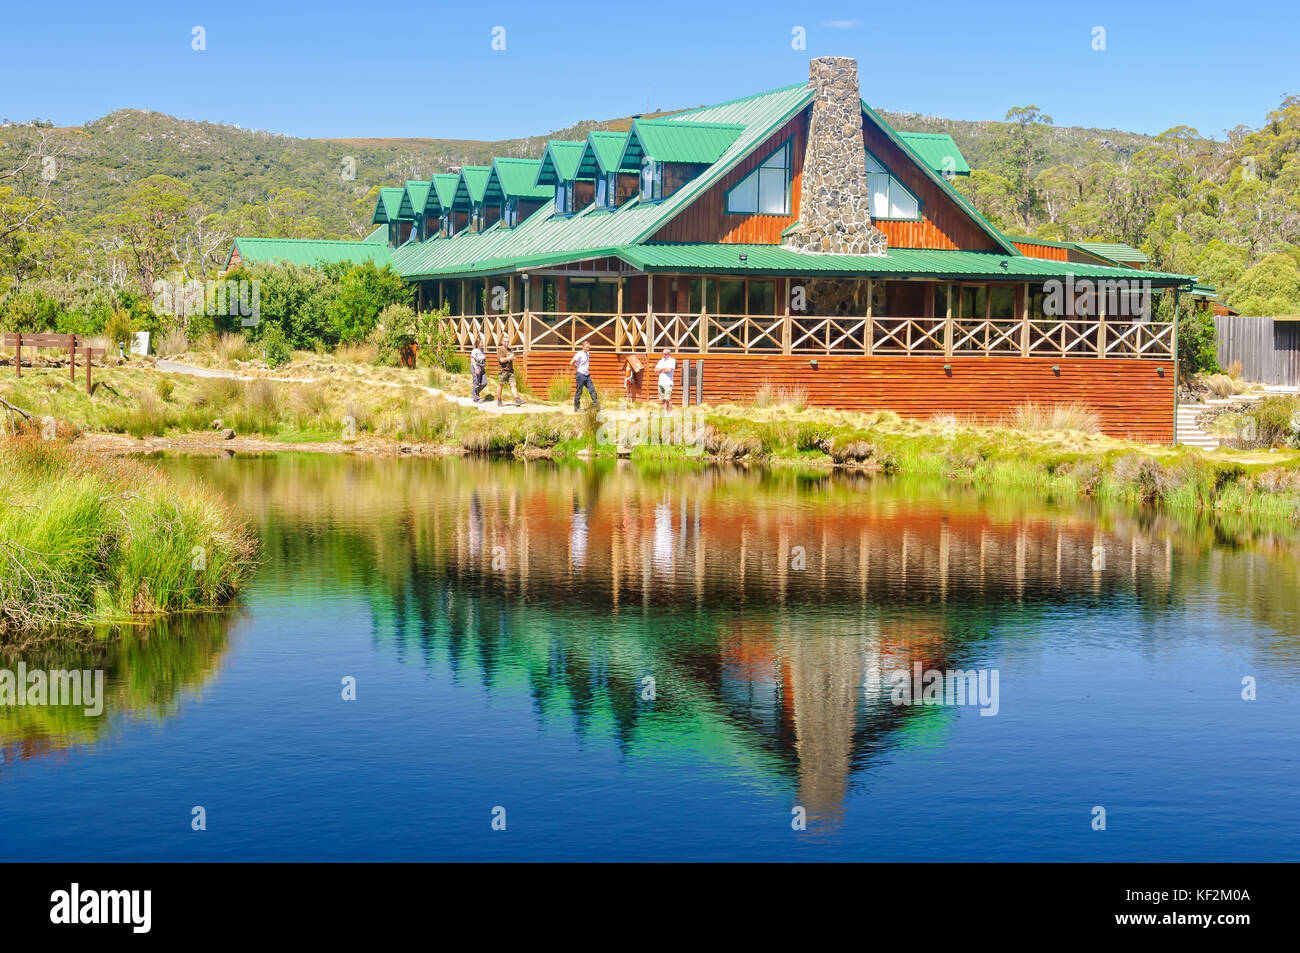 Peppers Cradle Mountain Lodge is an iconic wilderness experience - Tasmania, Australia Stock Photo